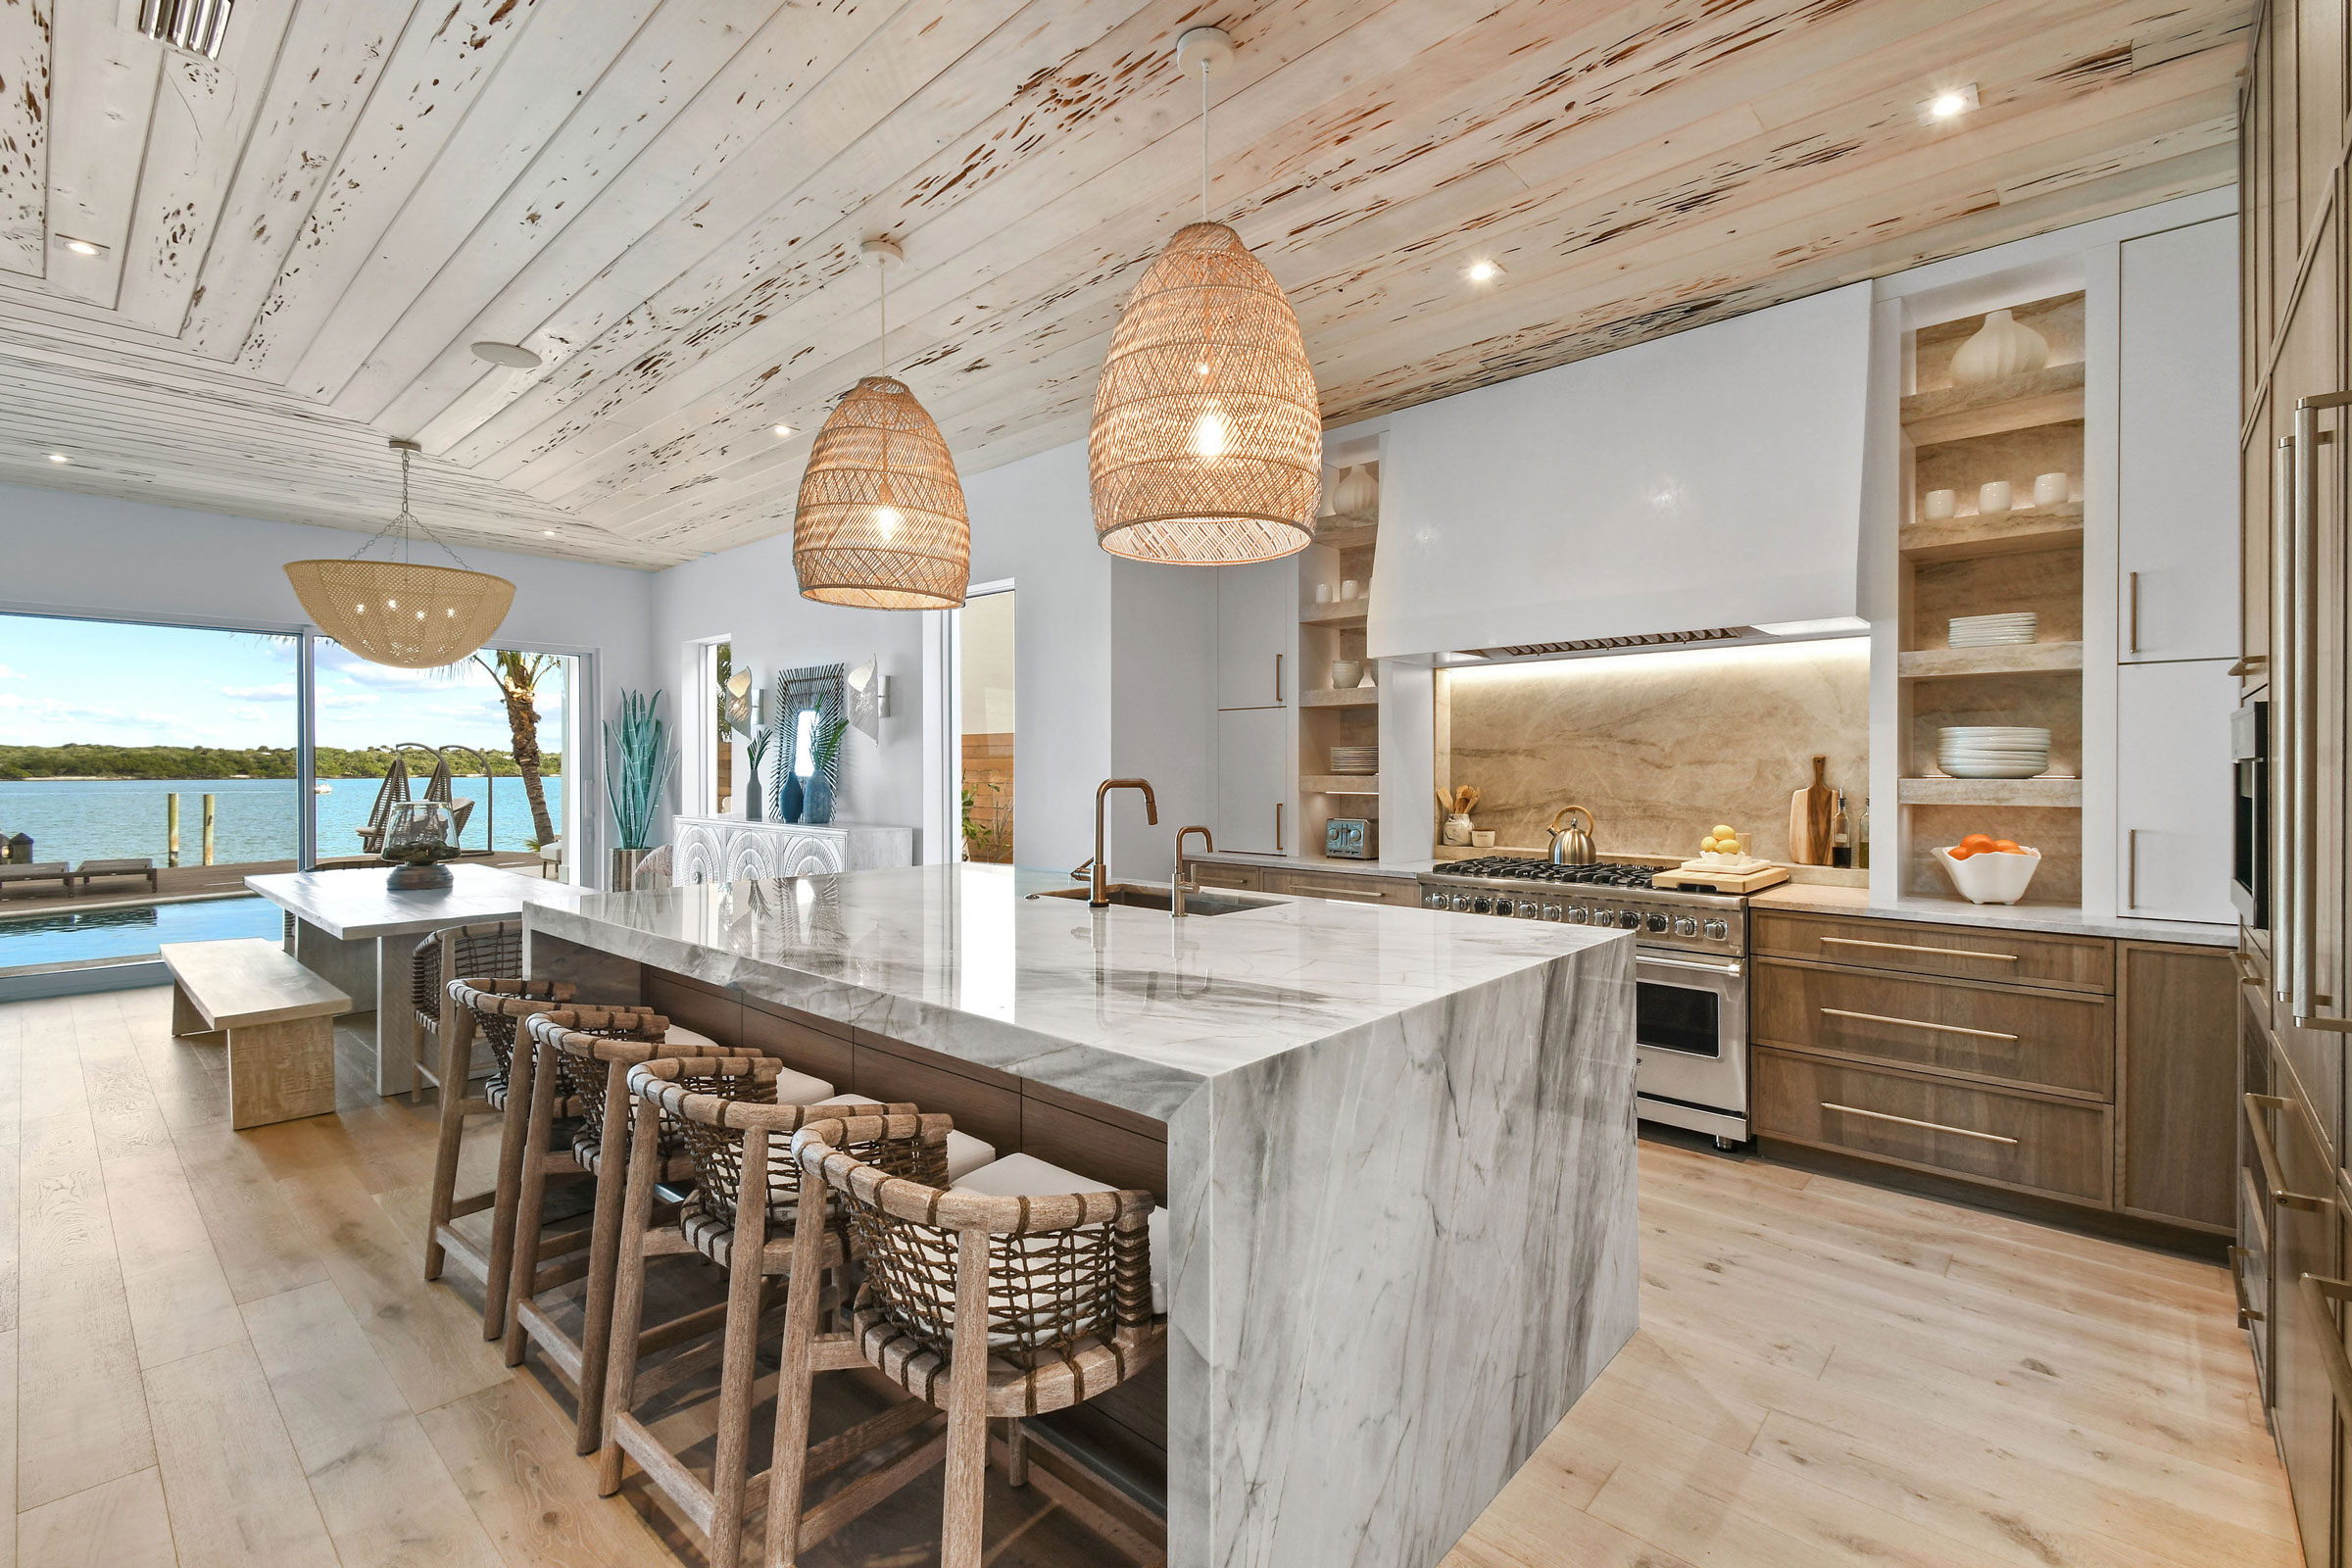 Luxury Family Beach House Kitchen - Crystal Cabinets